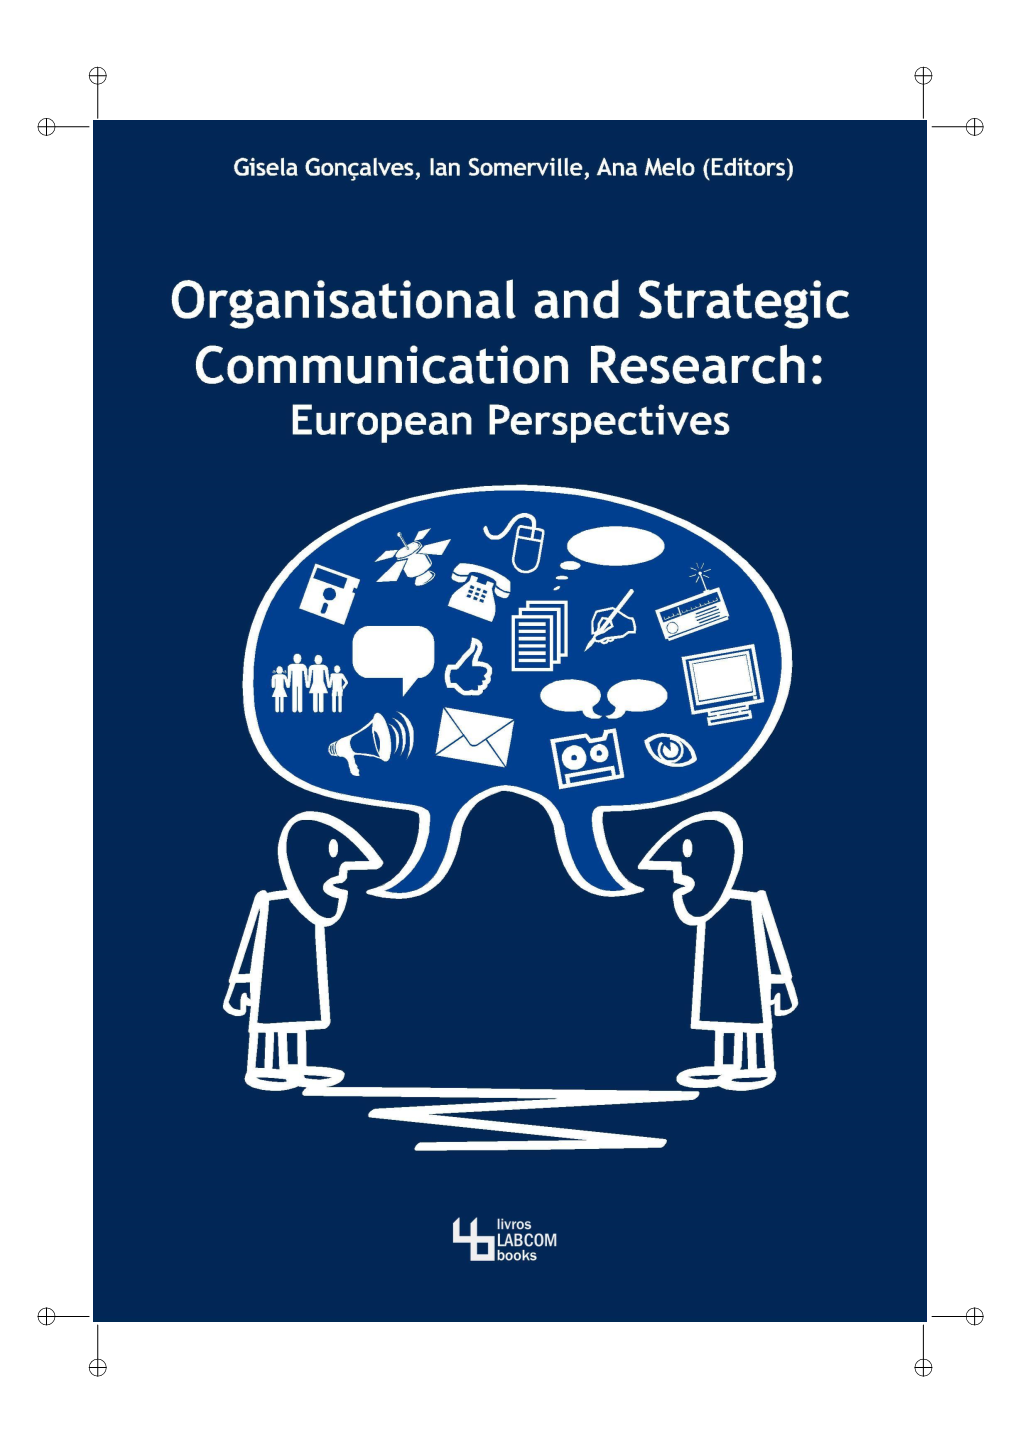 Organisational and Strategic Communication Research: European Perspectives